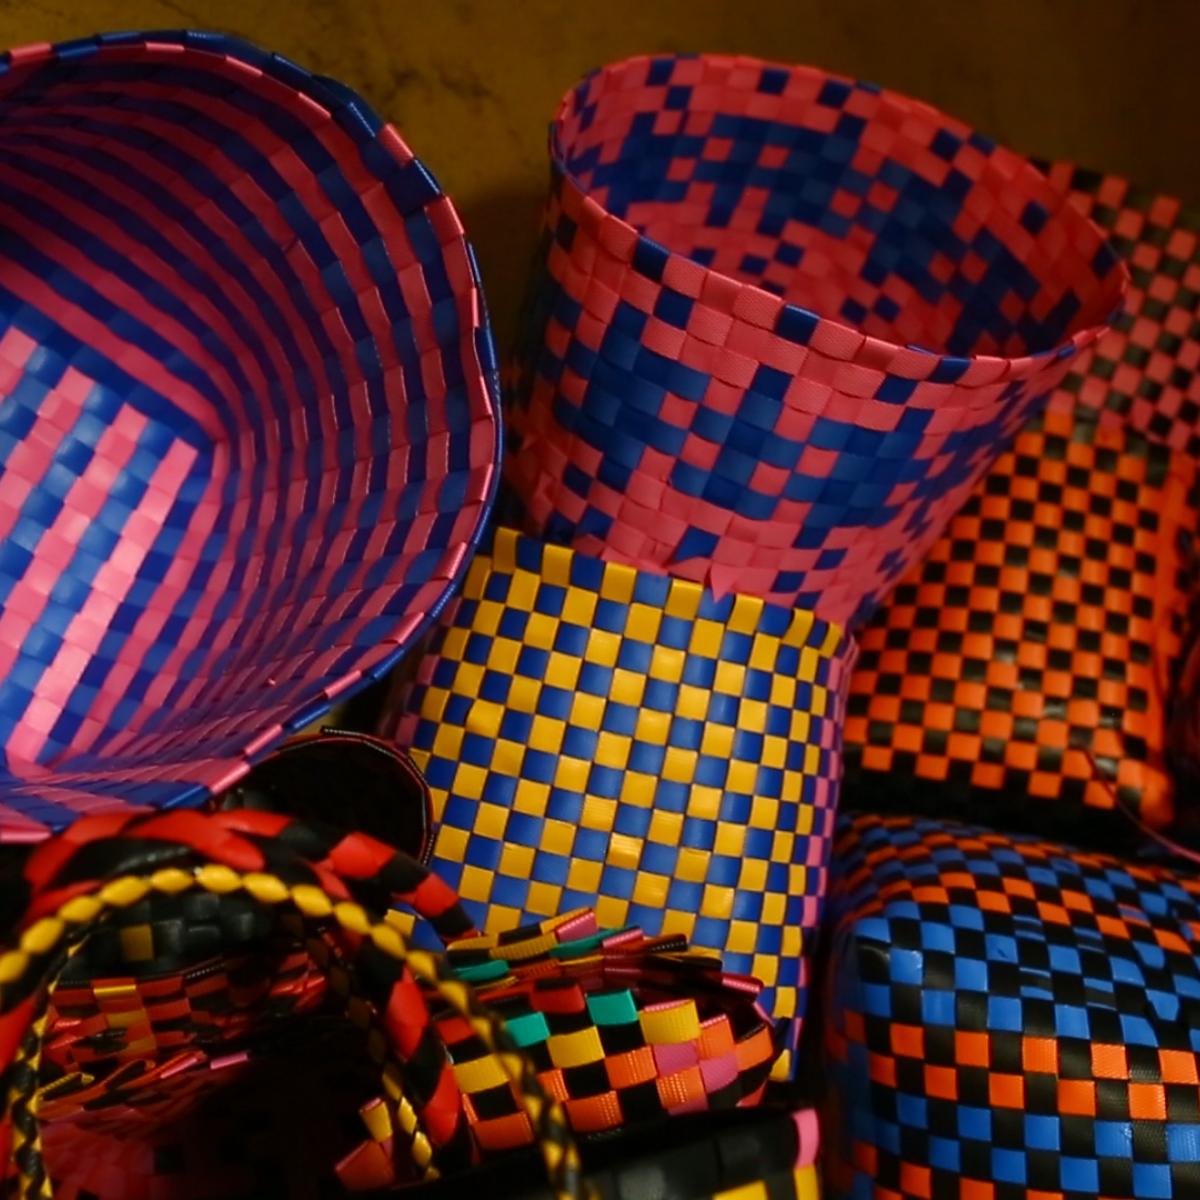 Colorful baskets.